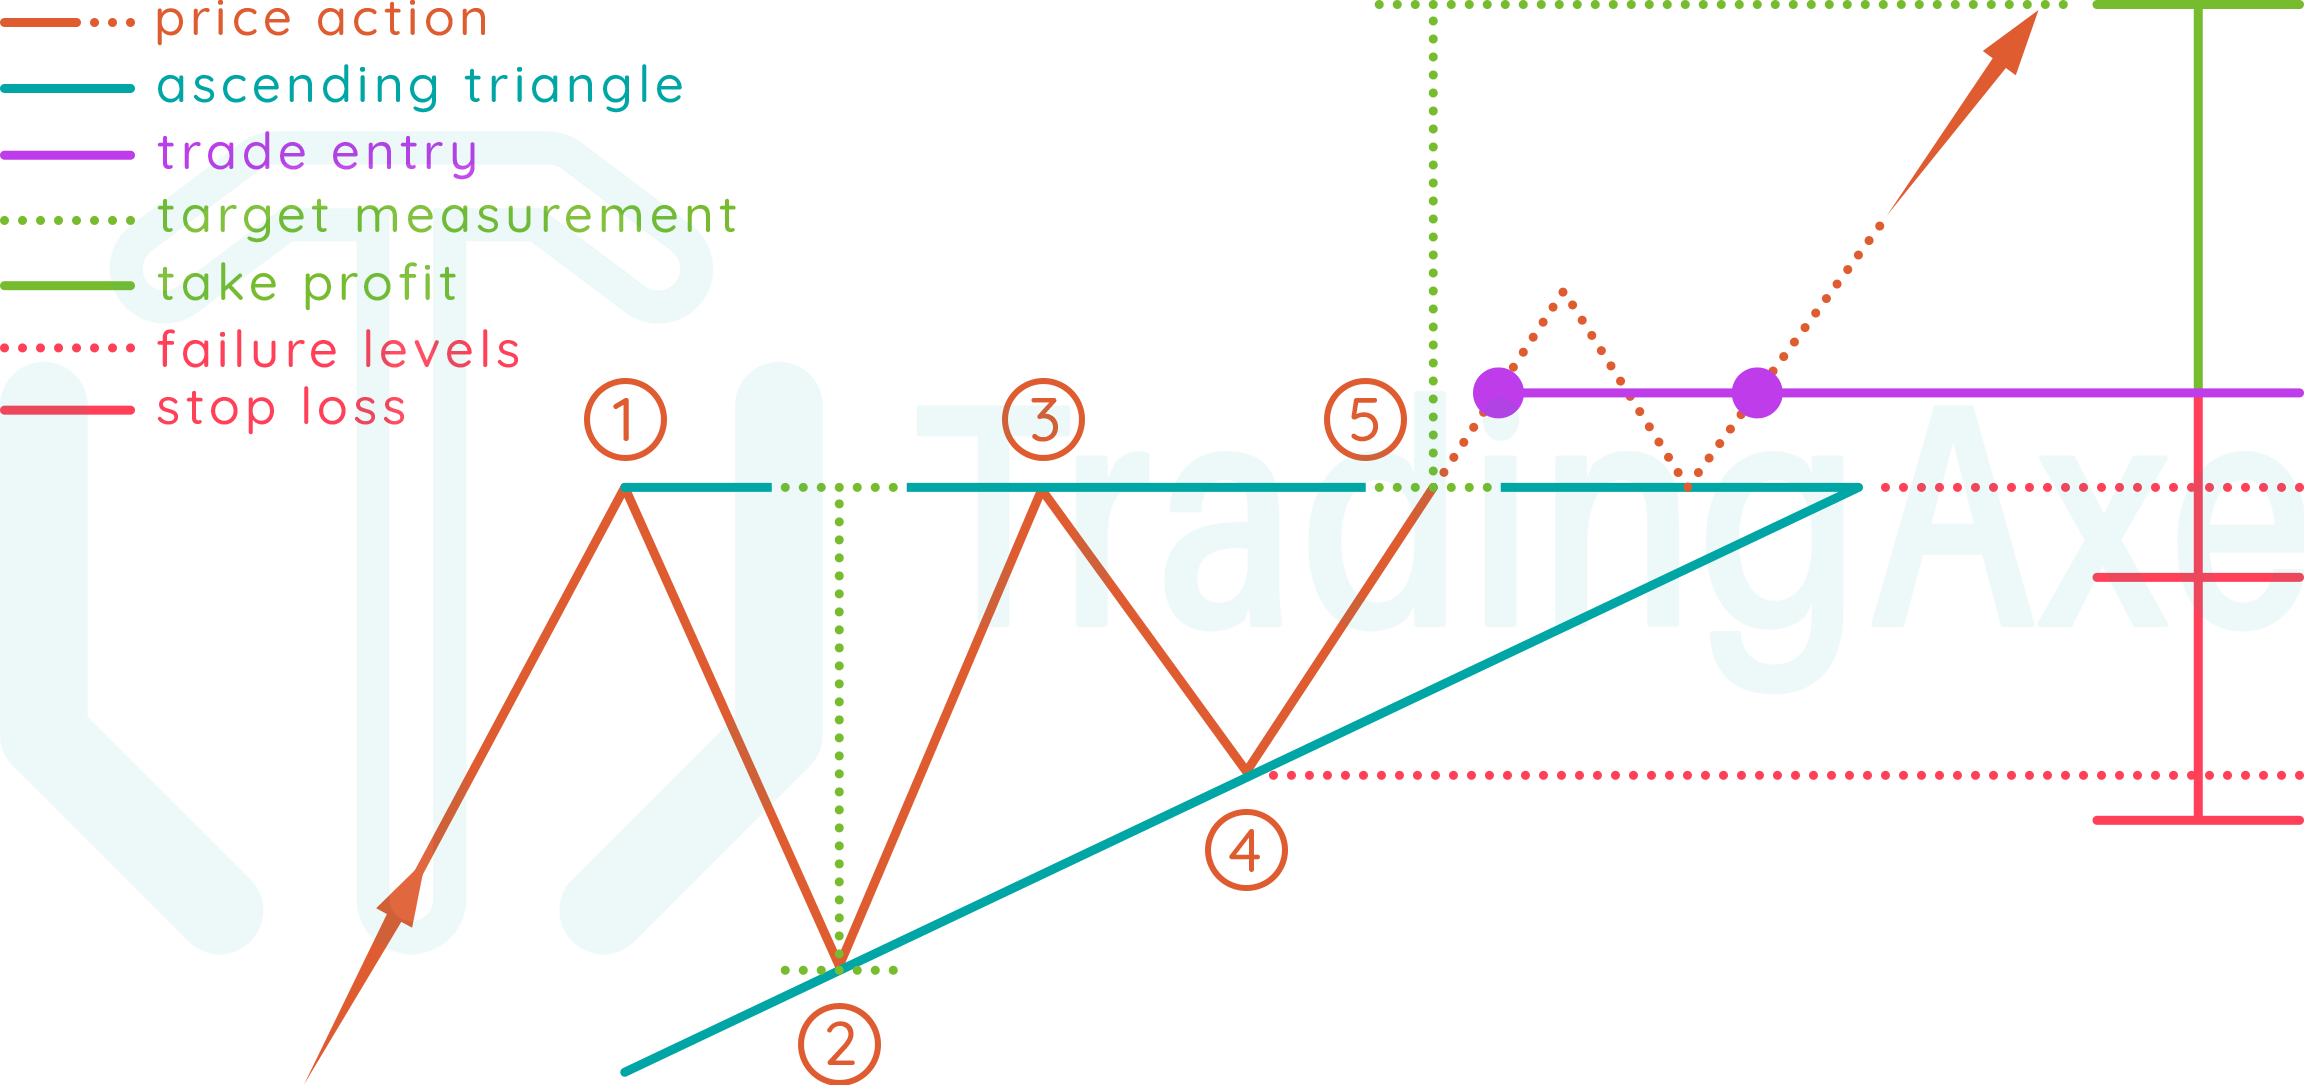 How to trade ascending triangle chart pattern